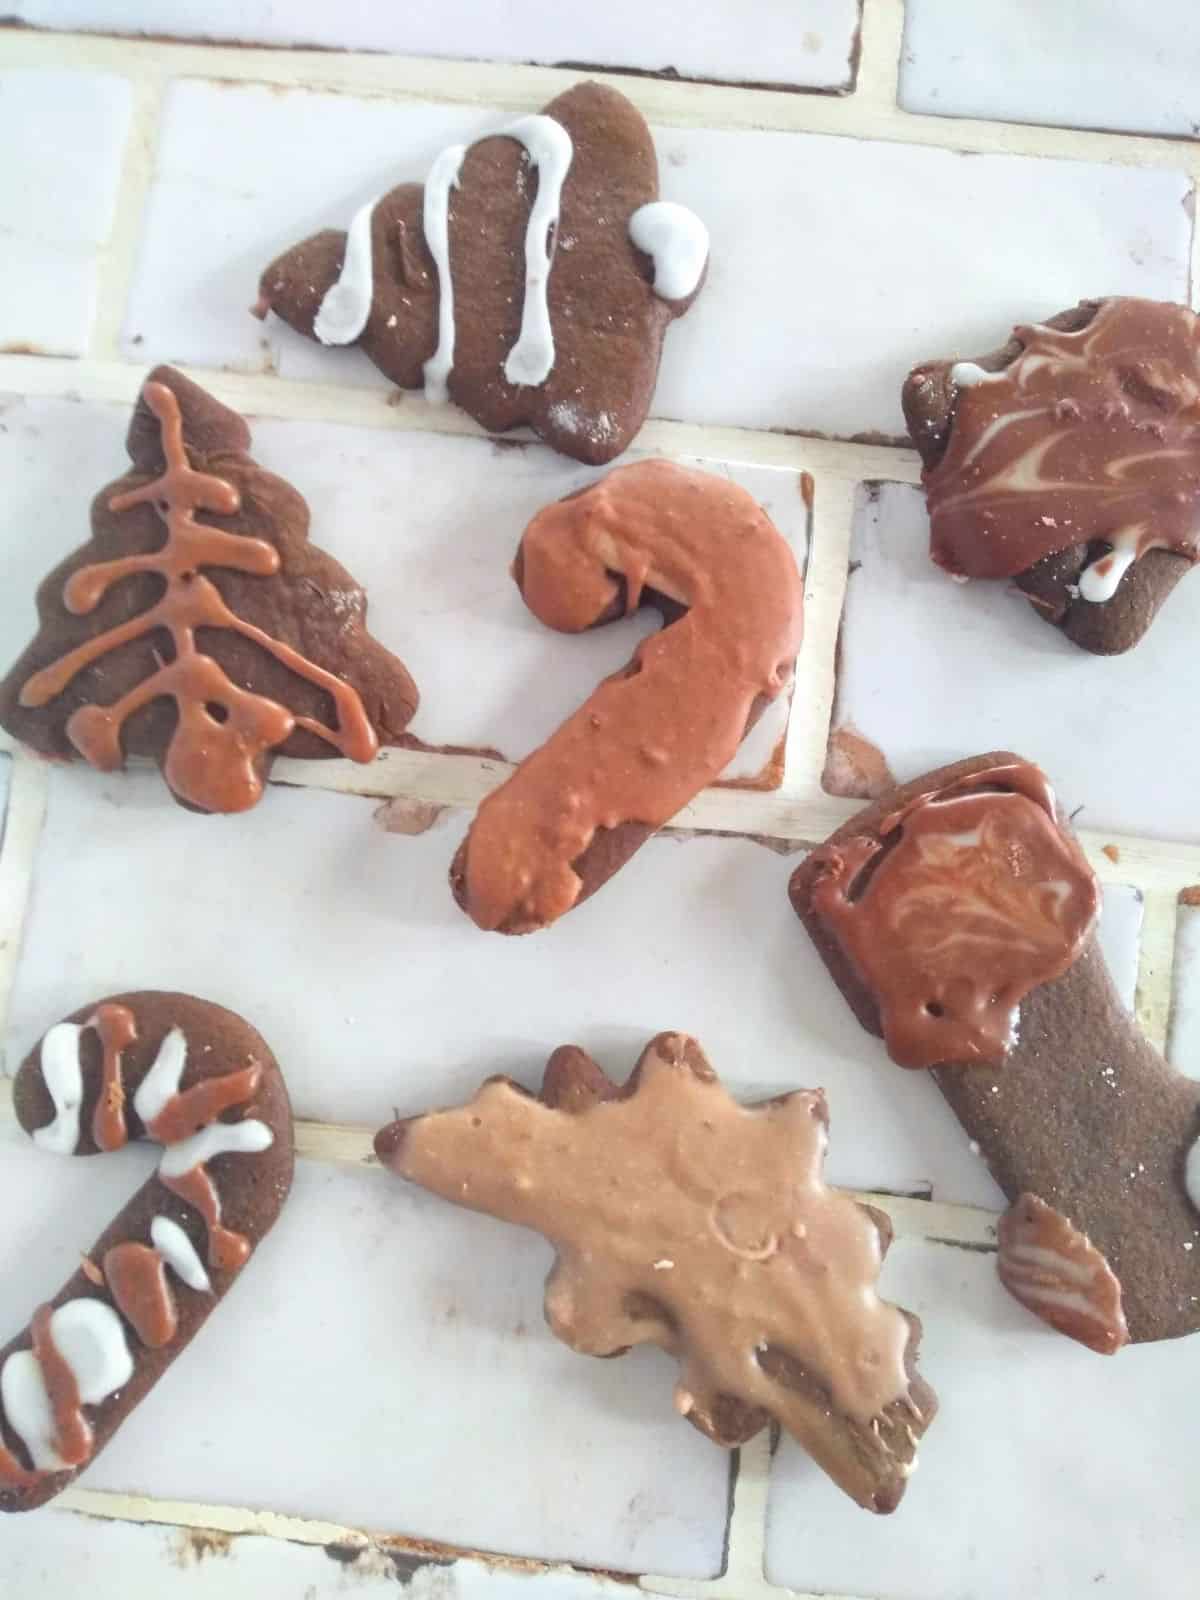 Small cut out ginger cookies in shapes lie trees, candy canes, stockings, stars, bells, and a dinosaur. The cookies are frosted with different colored chocolate frostings and are sitting on a white tile countertop.